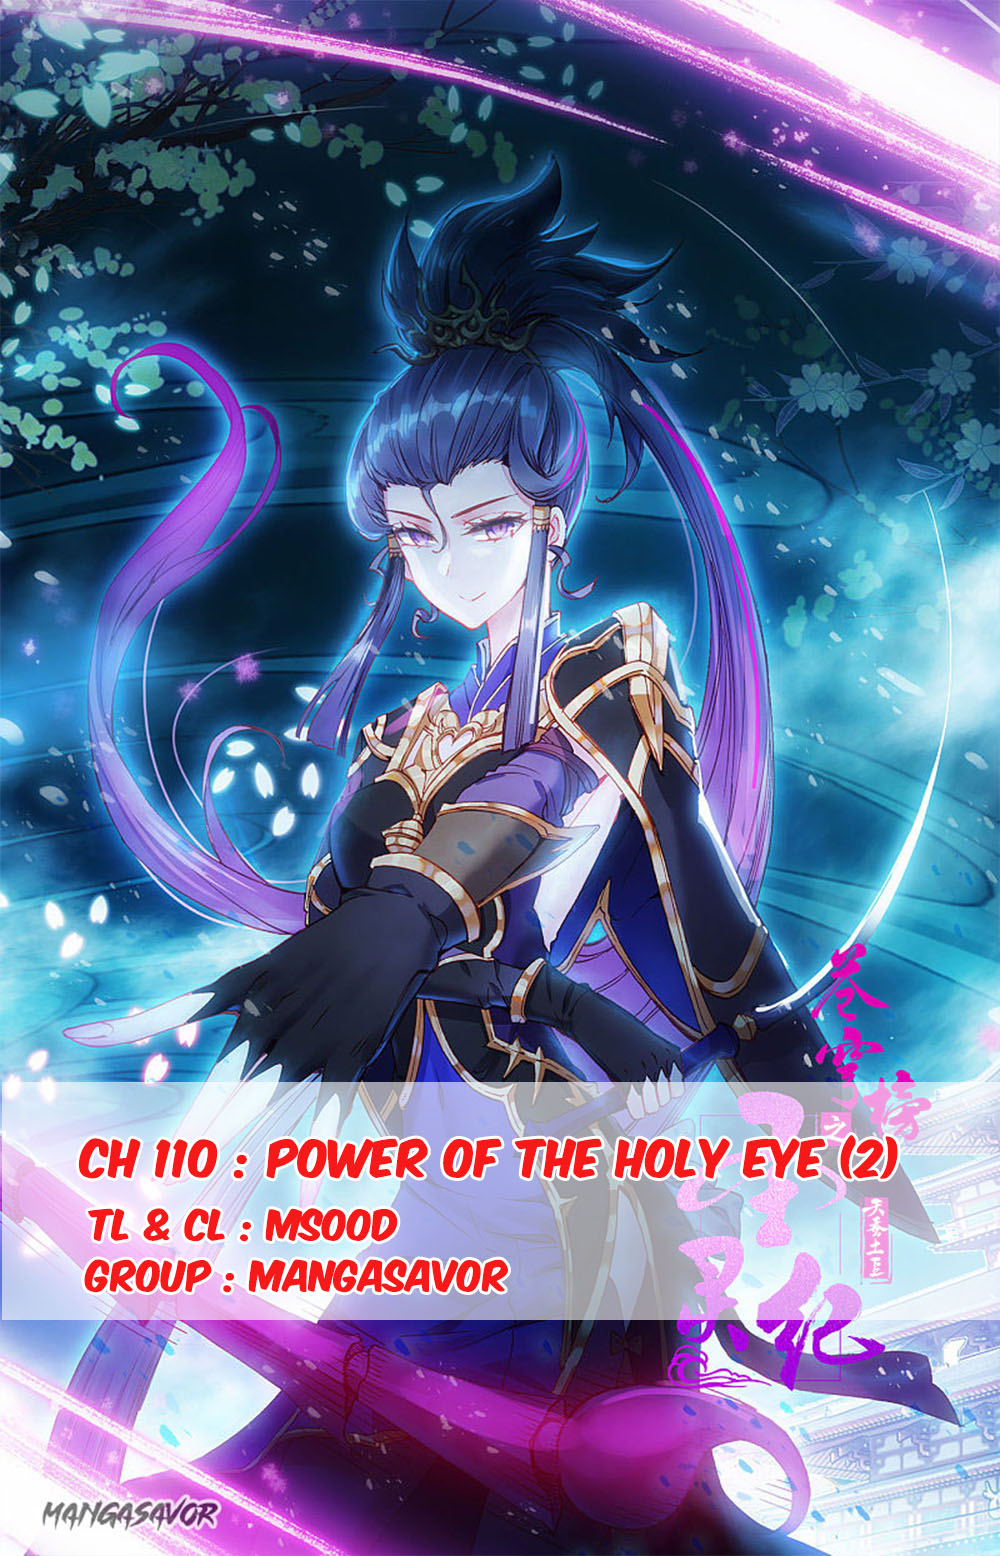 The Heaven's List Ch. 110.5 Power of the Holy Eye (2)